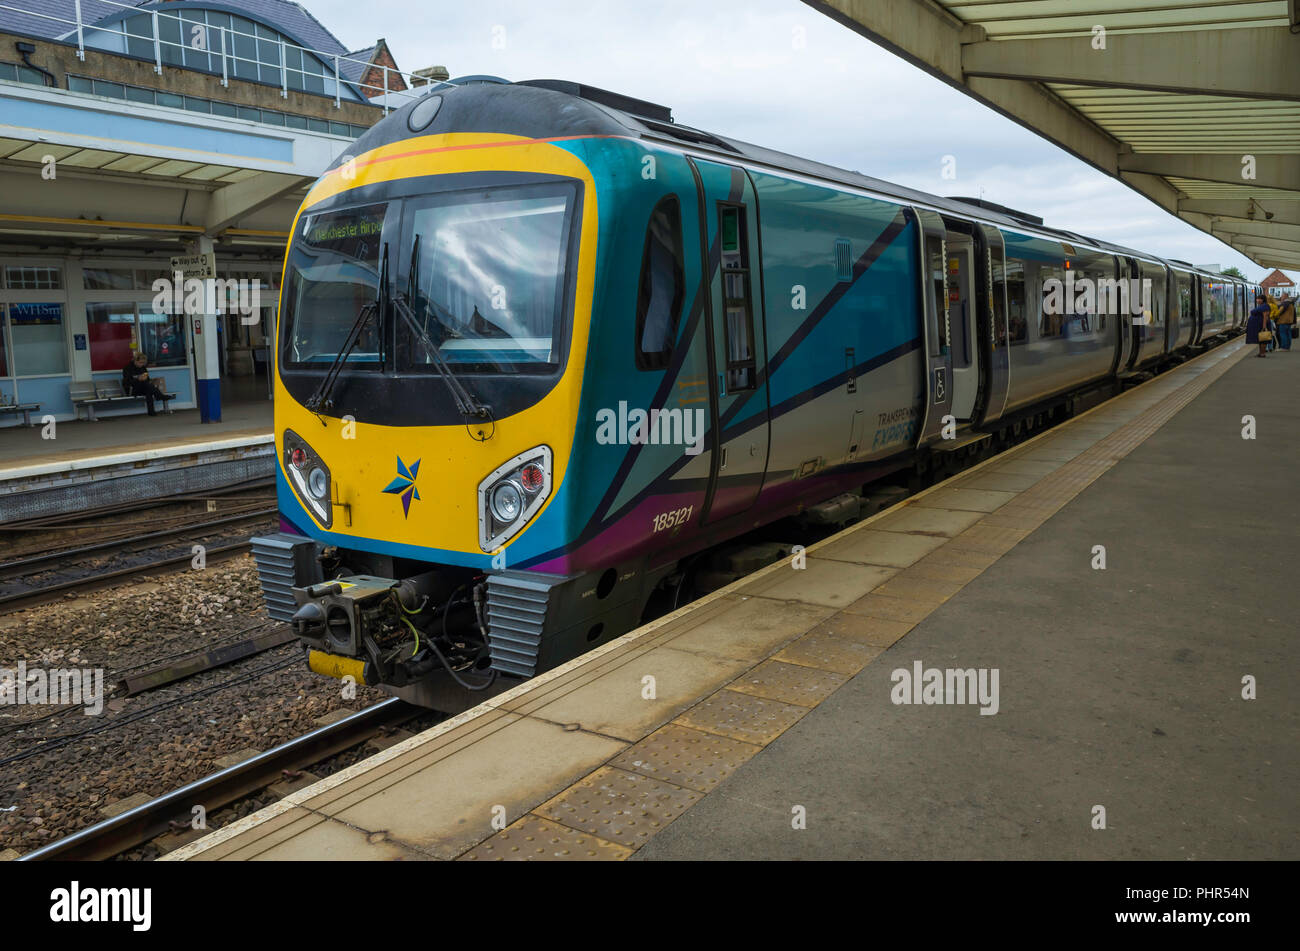 Trans Pennine Express train in Middlesbrough Station about to depart on a service to Manchester Airport Stock Photo